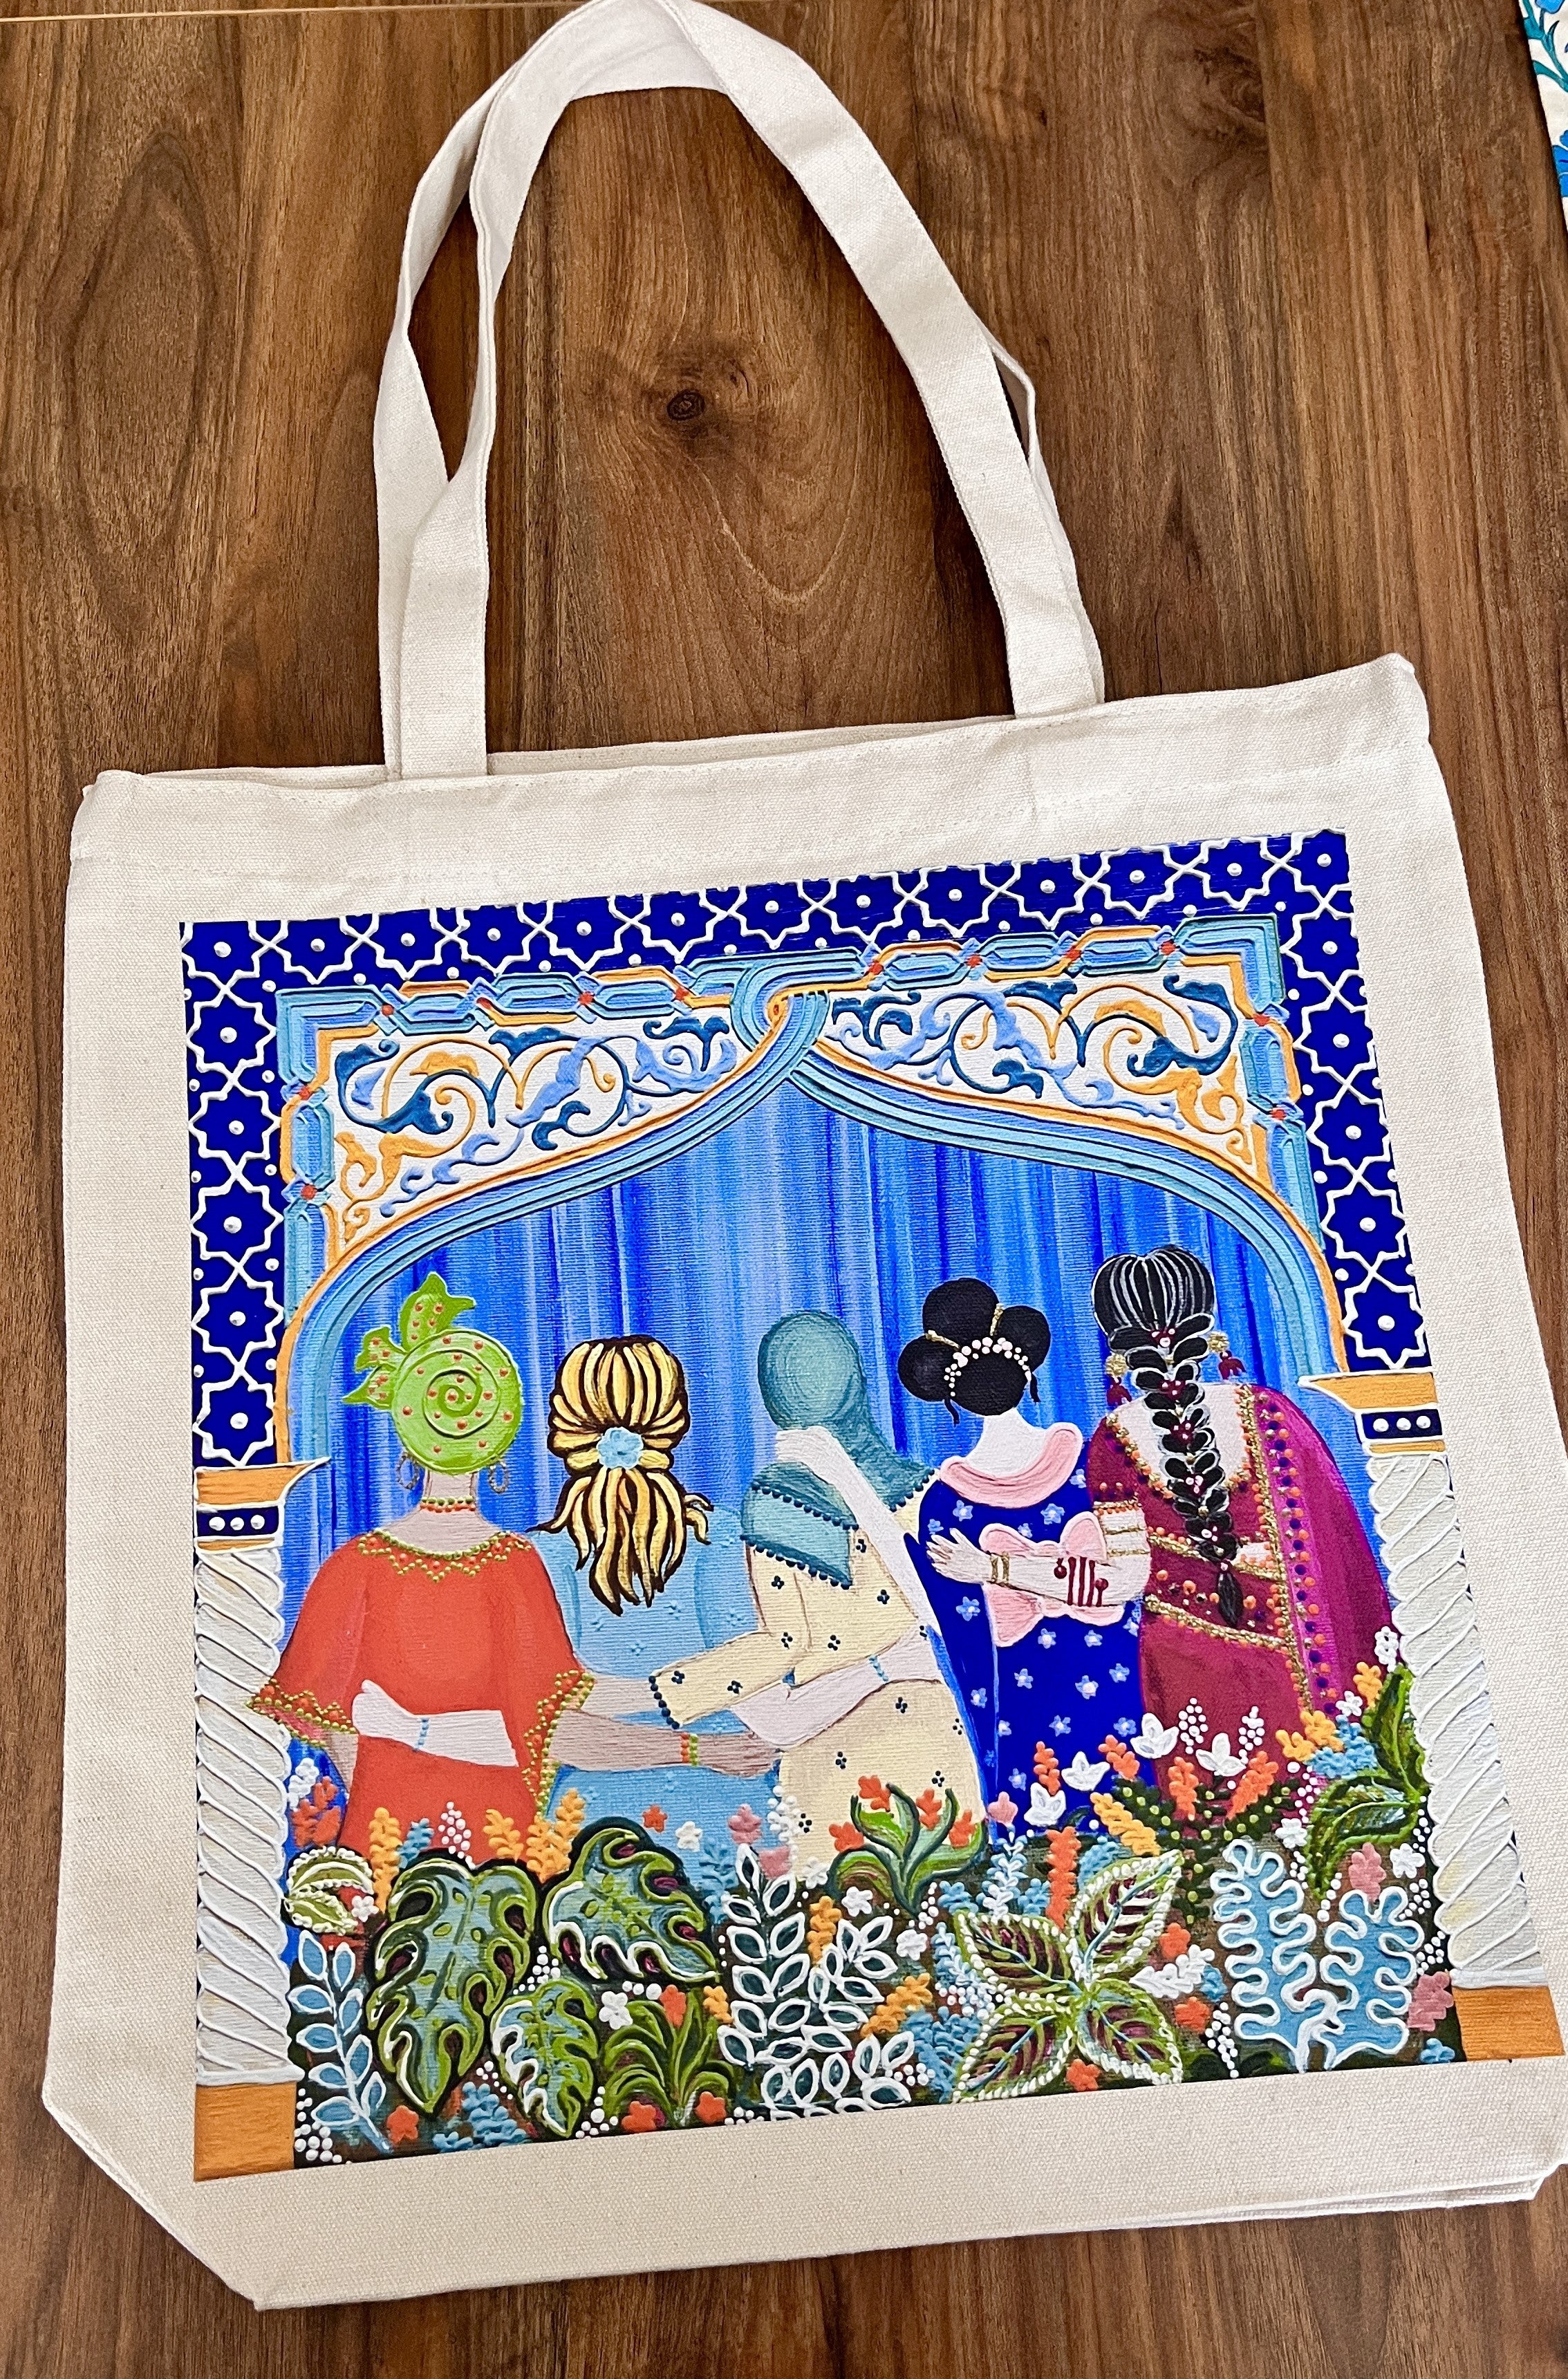 "Diversity is Beauty" tote bag